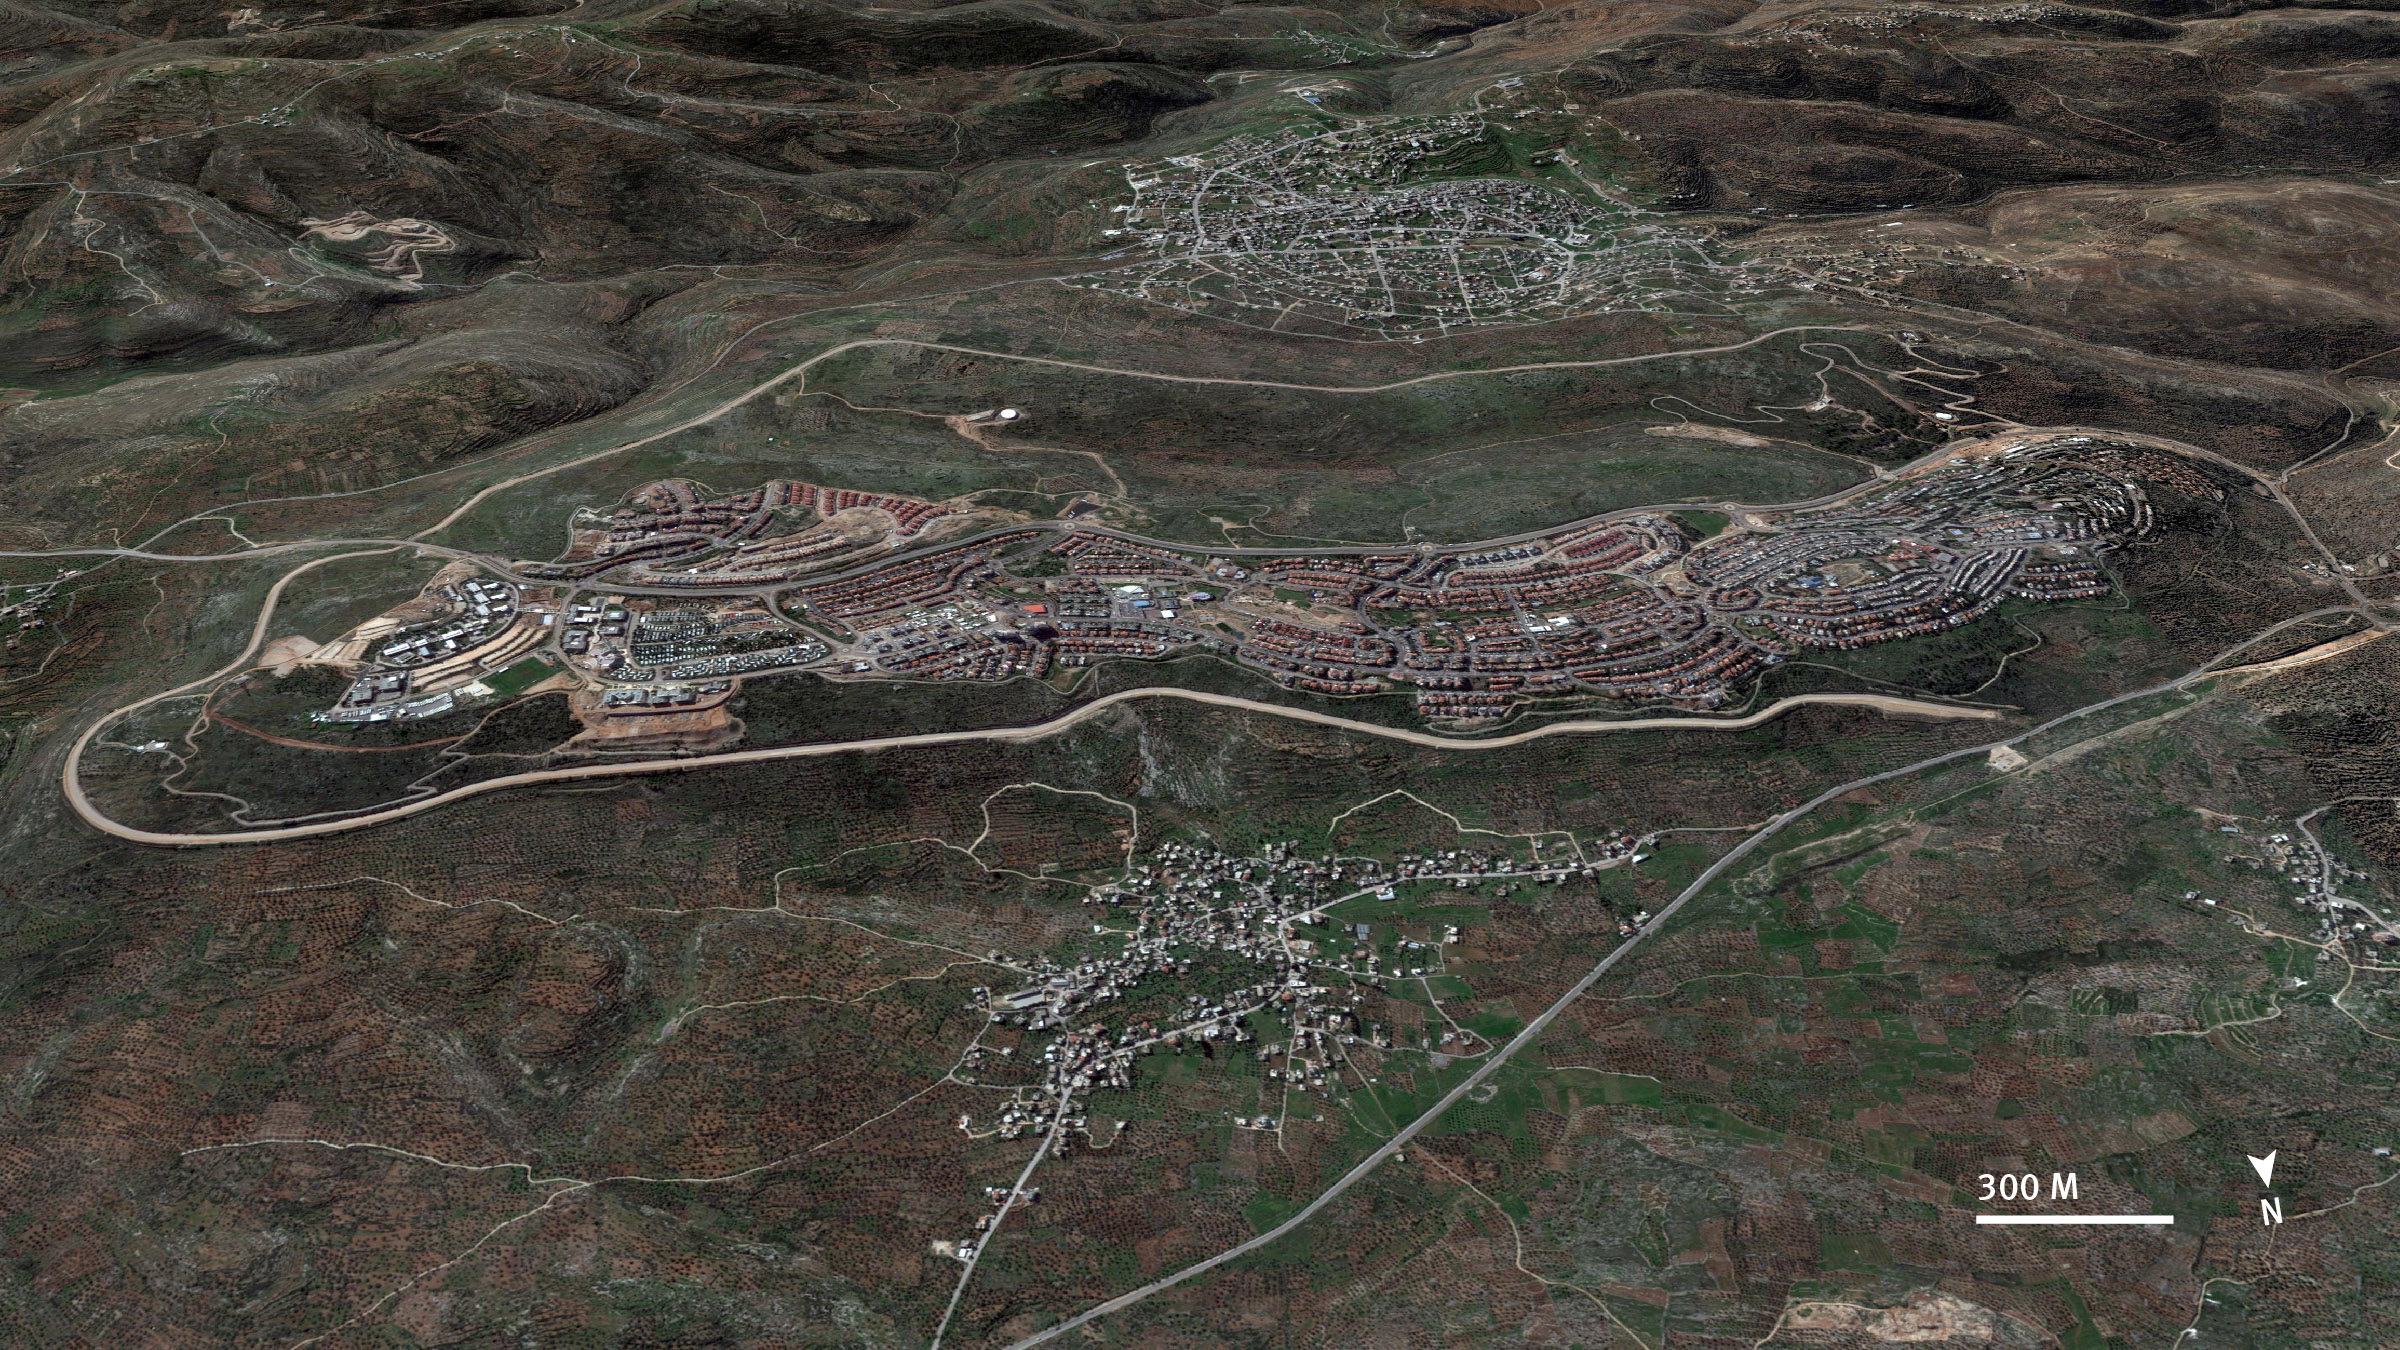 An aerial satellite image comparing Marda and Salfit